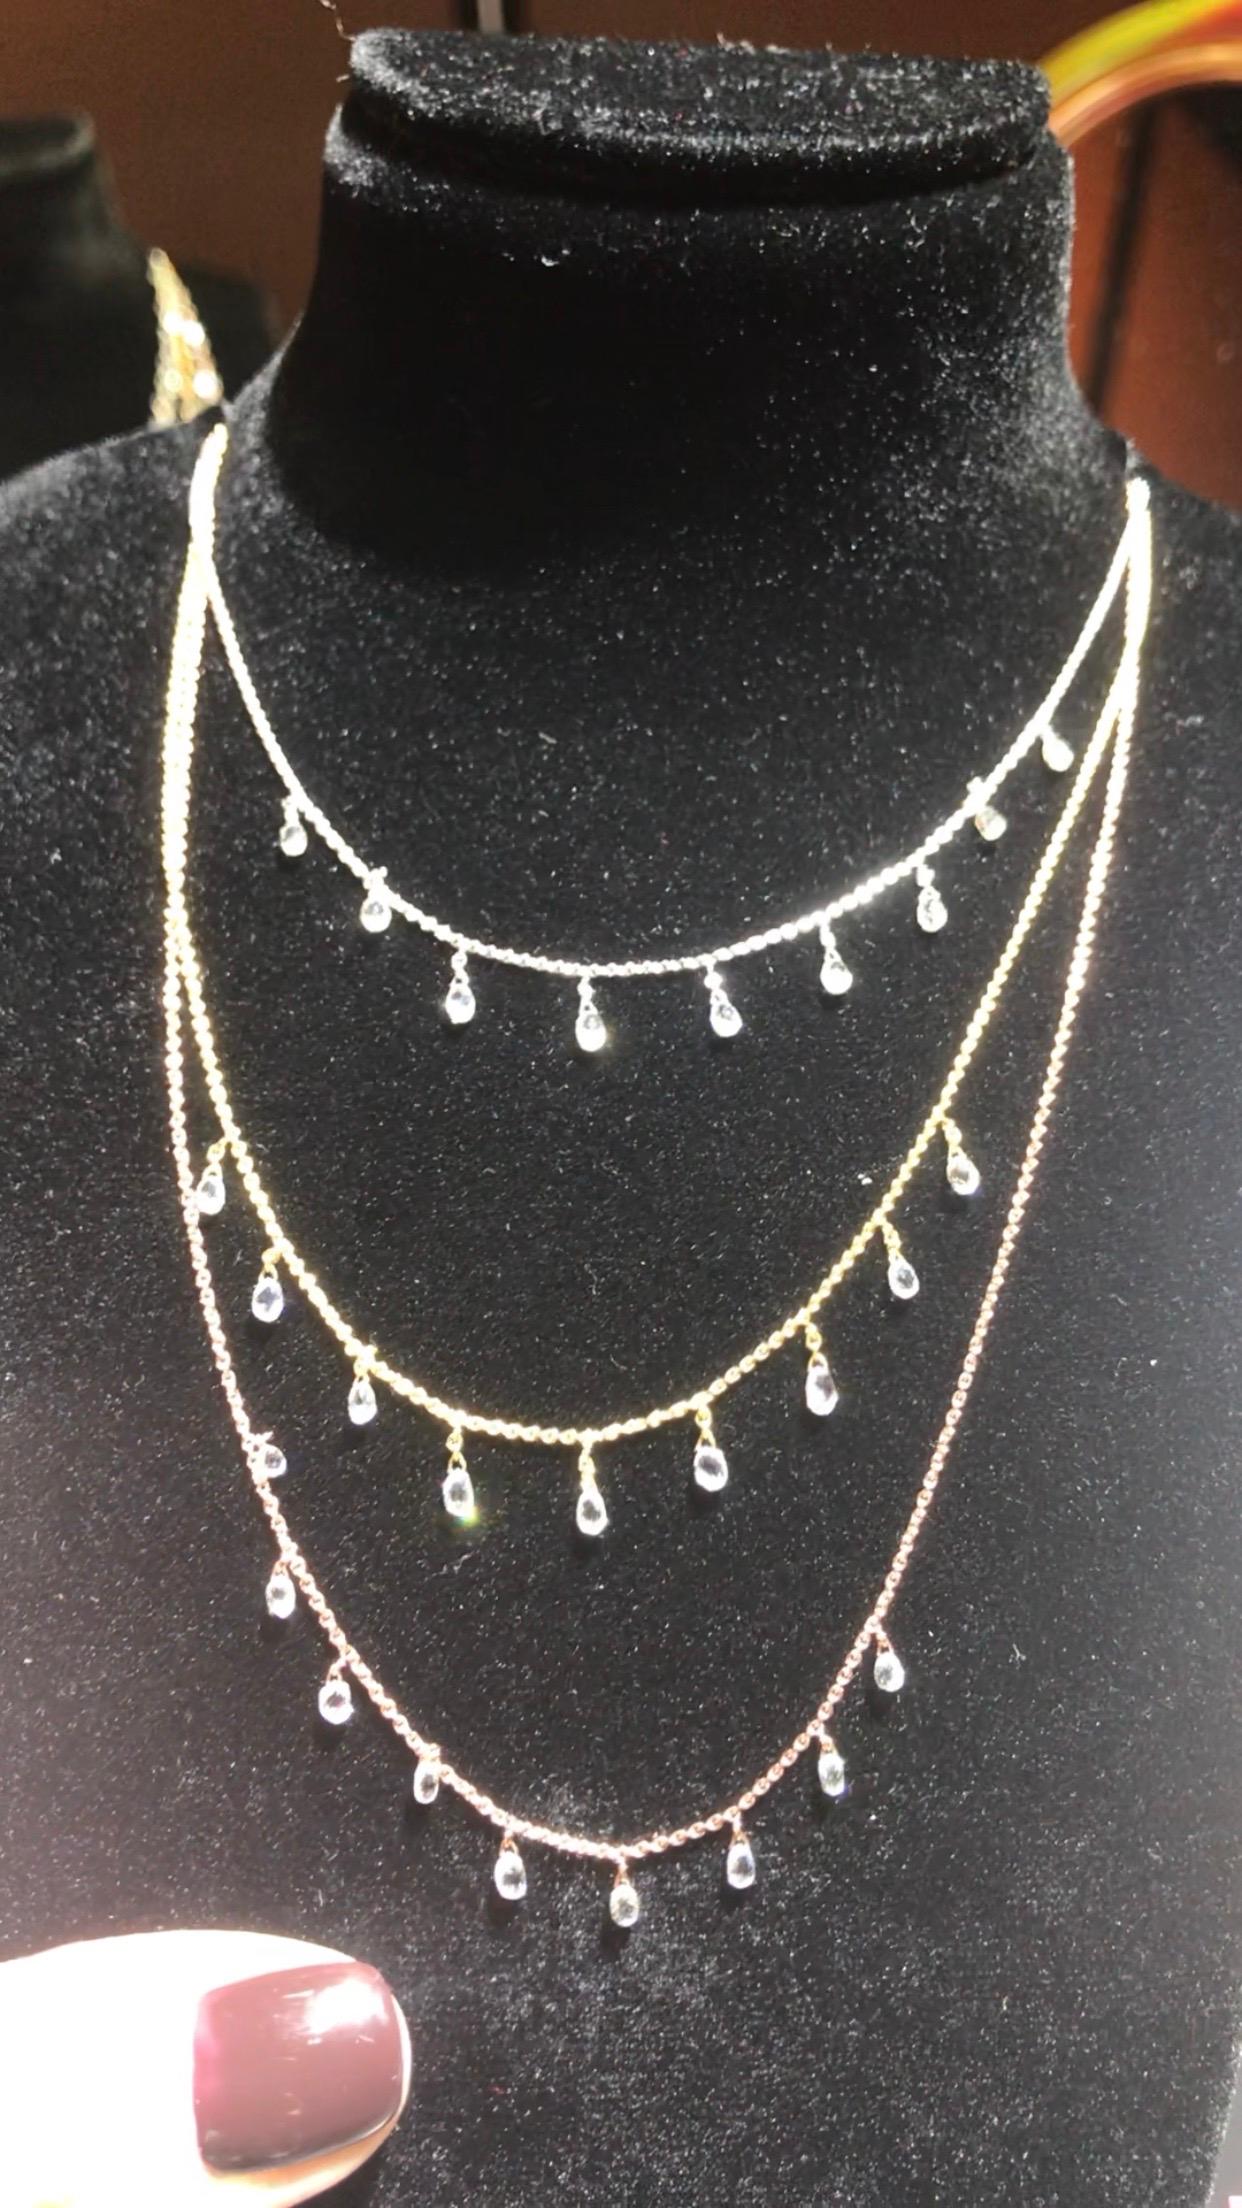 PANIM 1 Carat Mille Etoiles Dangling Diamond Necklace in 18 Karat White Gold In New Condition For Sale In Tsim Sha Tsui, Hong Kong